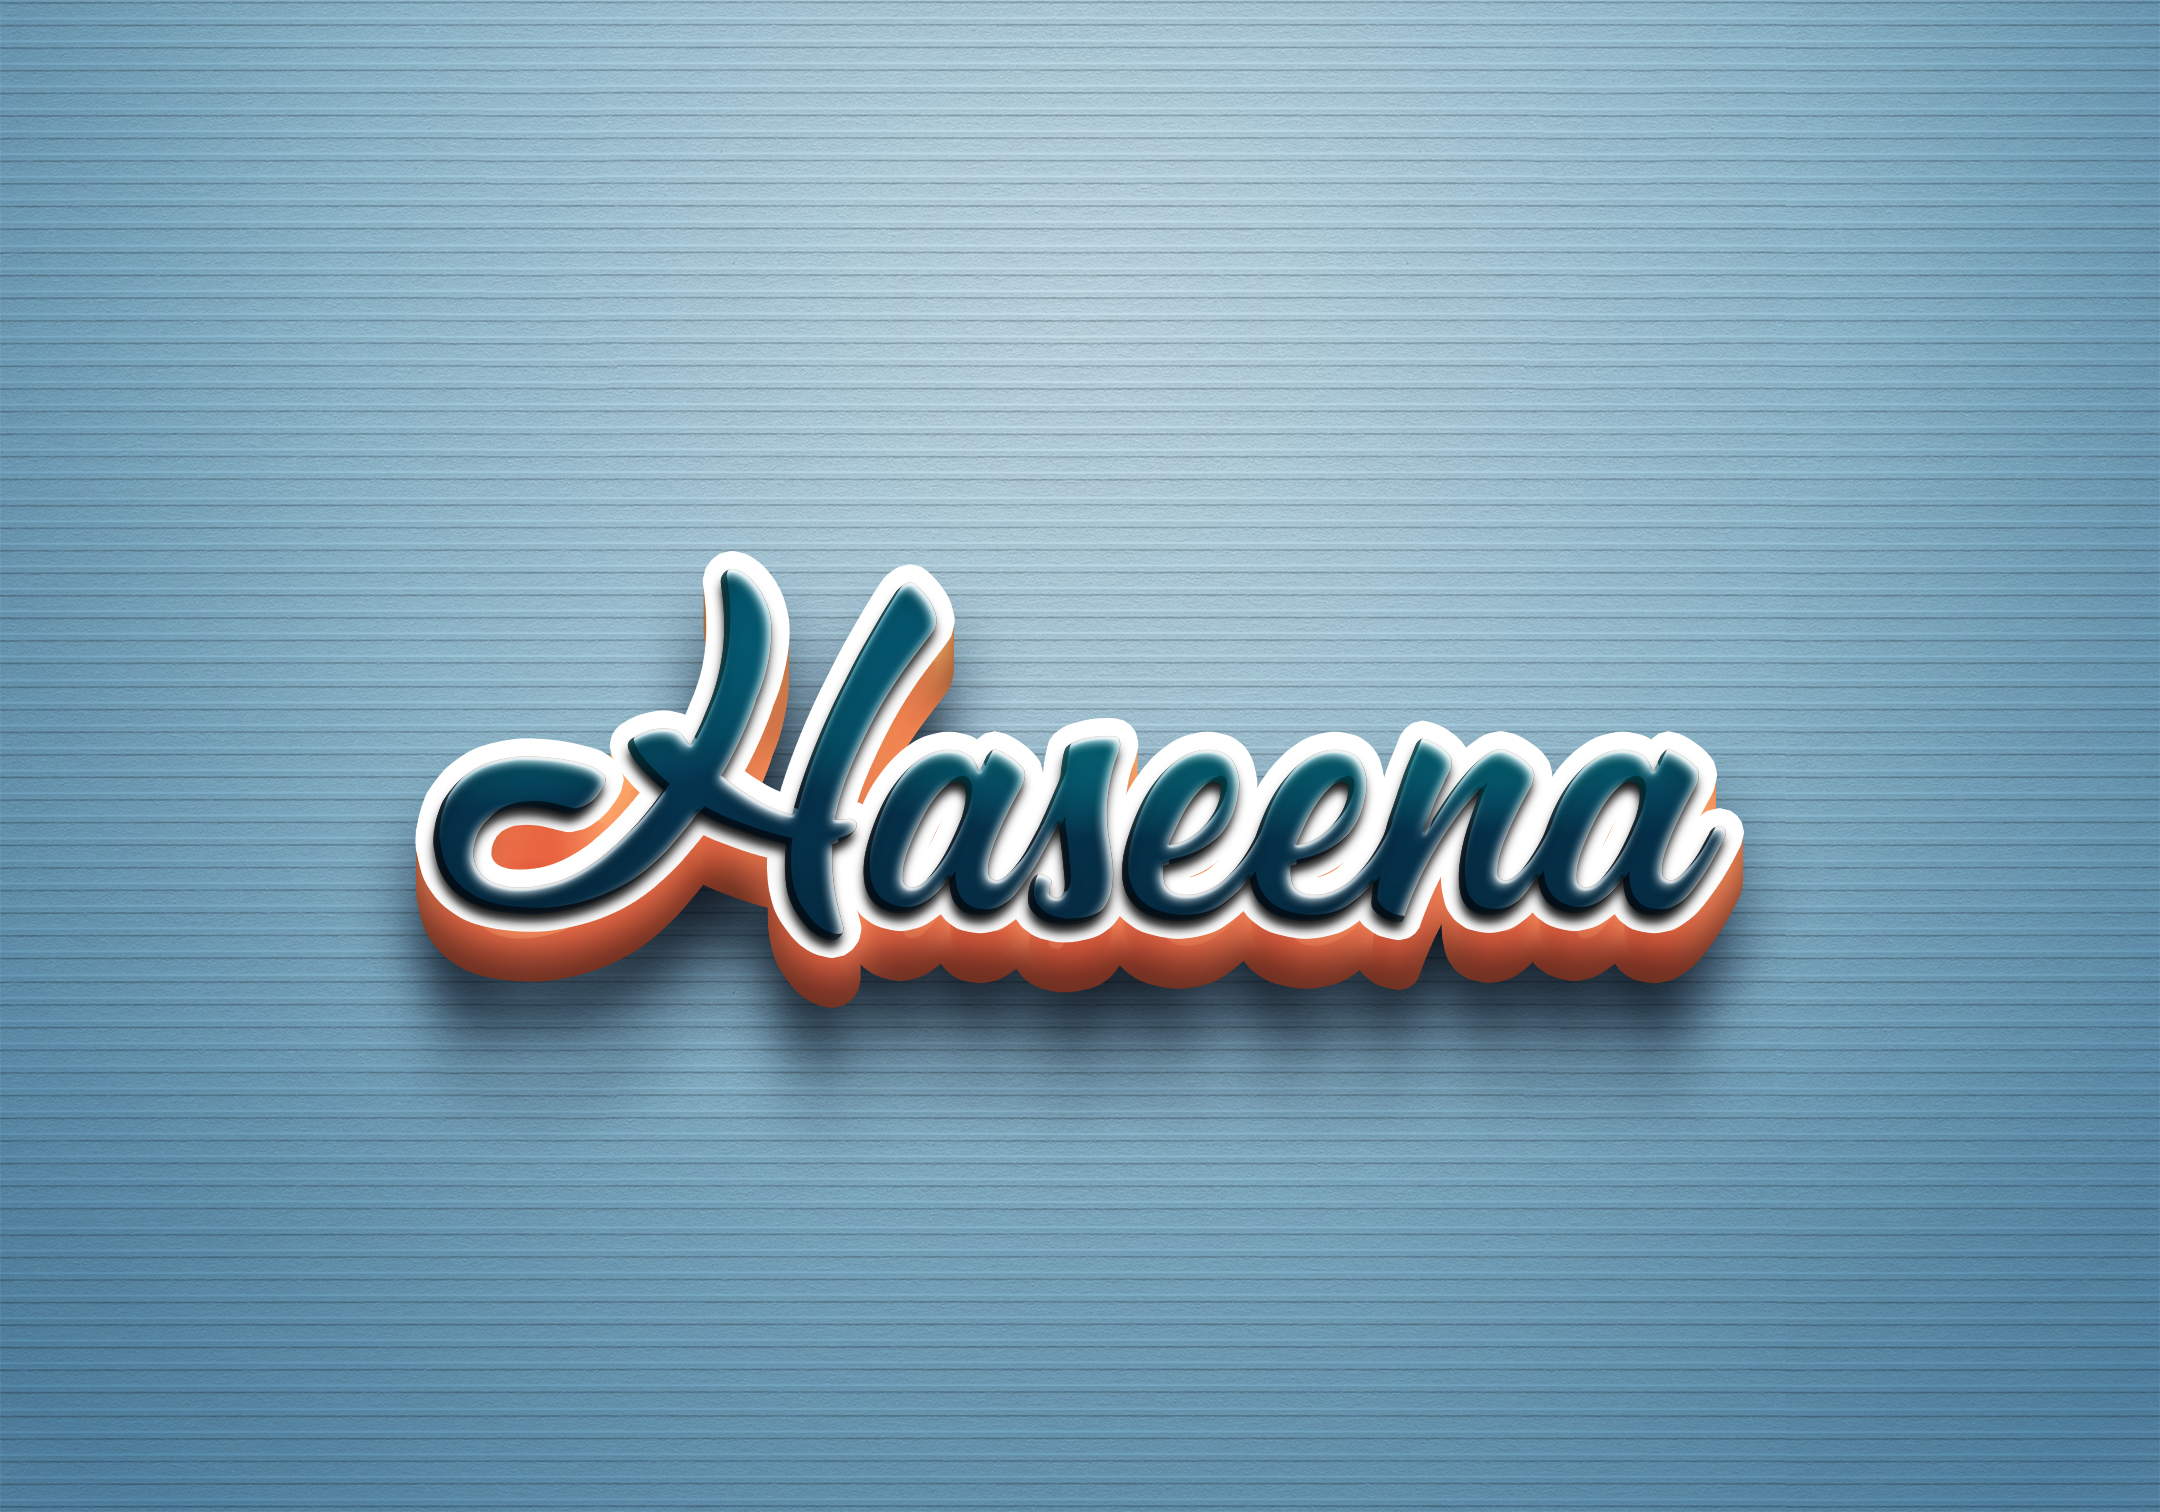 Hasina A Daughter's Tale - YouTube